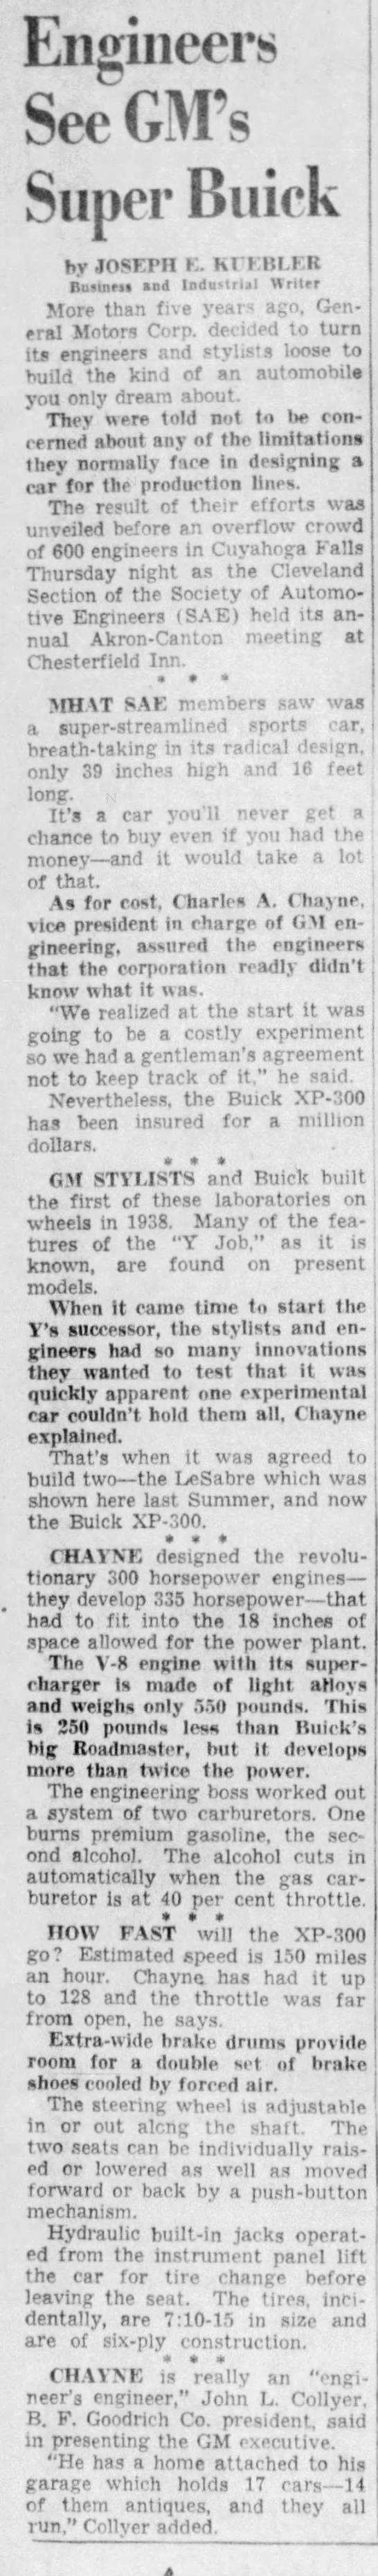 Engineers See GM's Super Buick - 